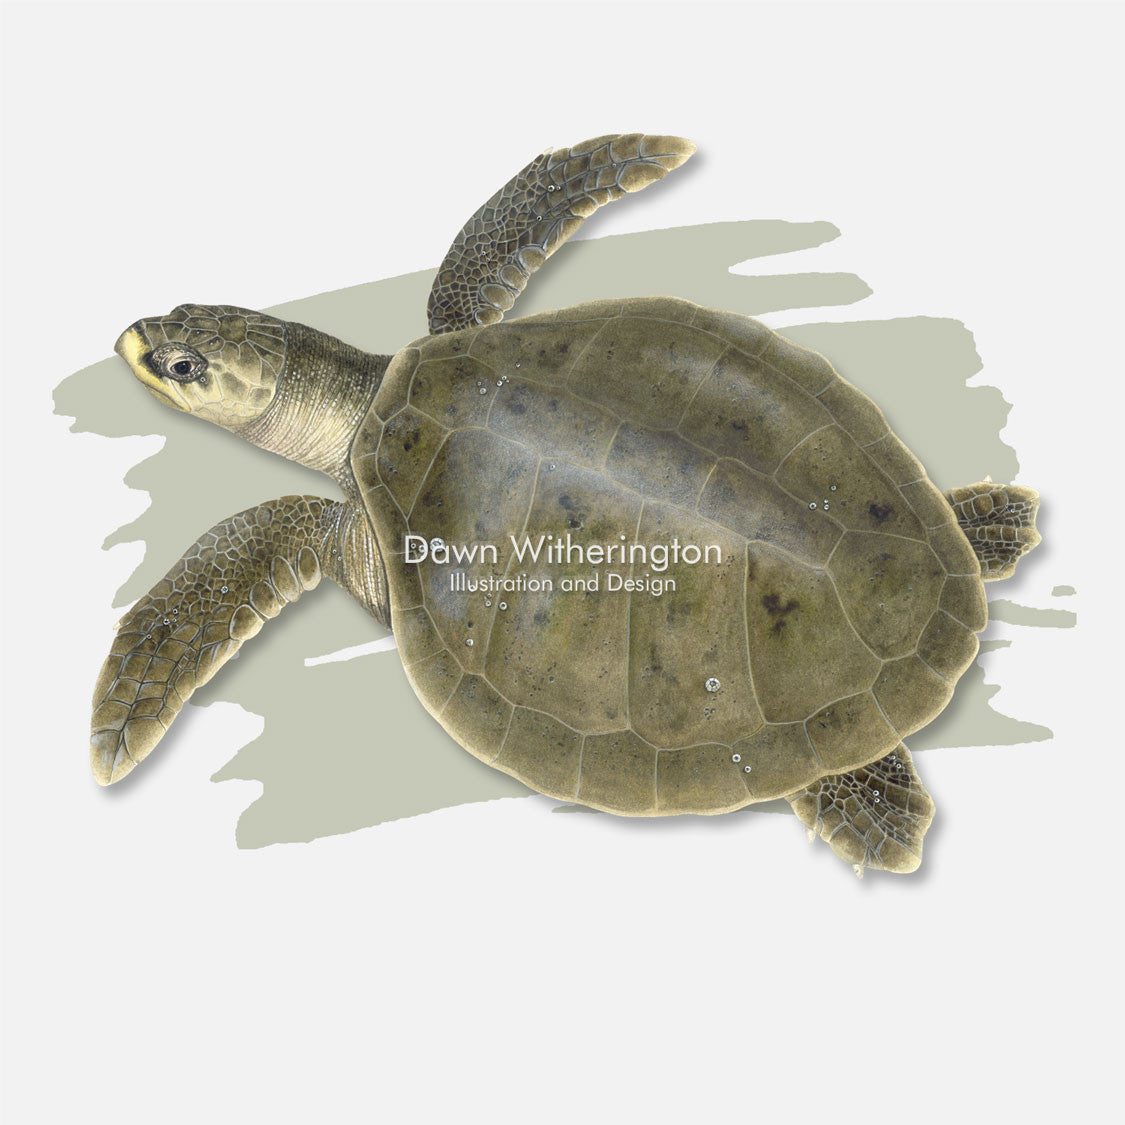 This beautiful illustration is of a Kemp's ridley sea turtle, Lepidochelys kempii, over a swash graphic. 